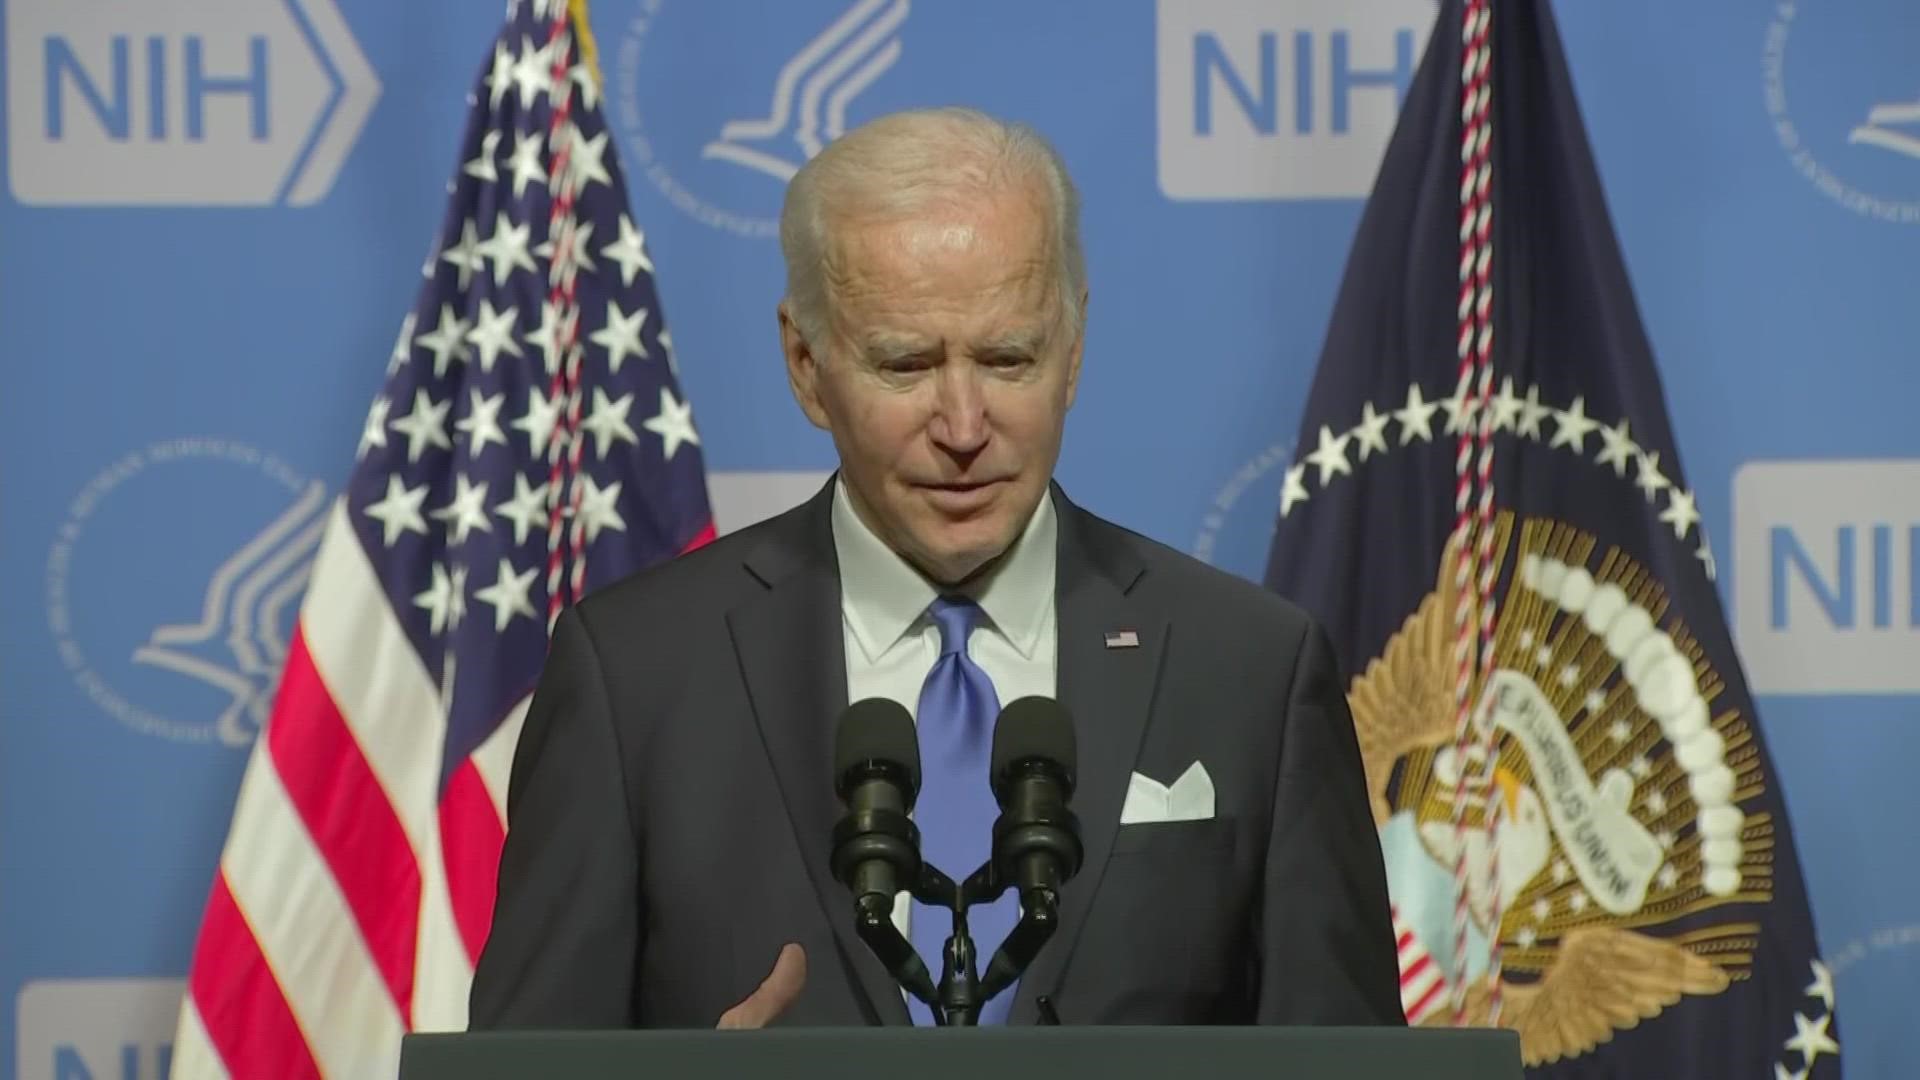 Biden said the strategy would fight COVID-19 “not with shutdowns or lockdowns but with more widespread vaccinations, boosters, testing, and more.”